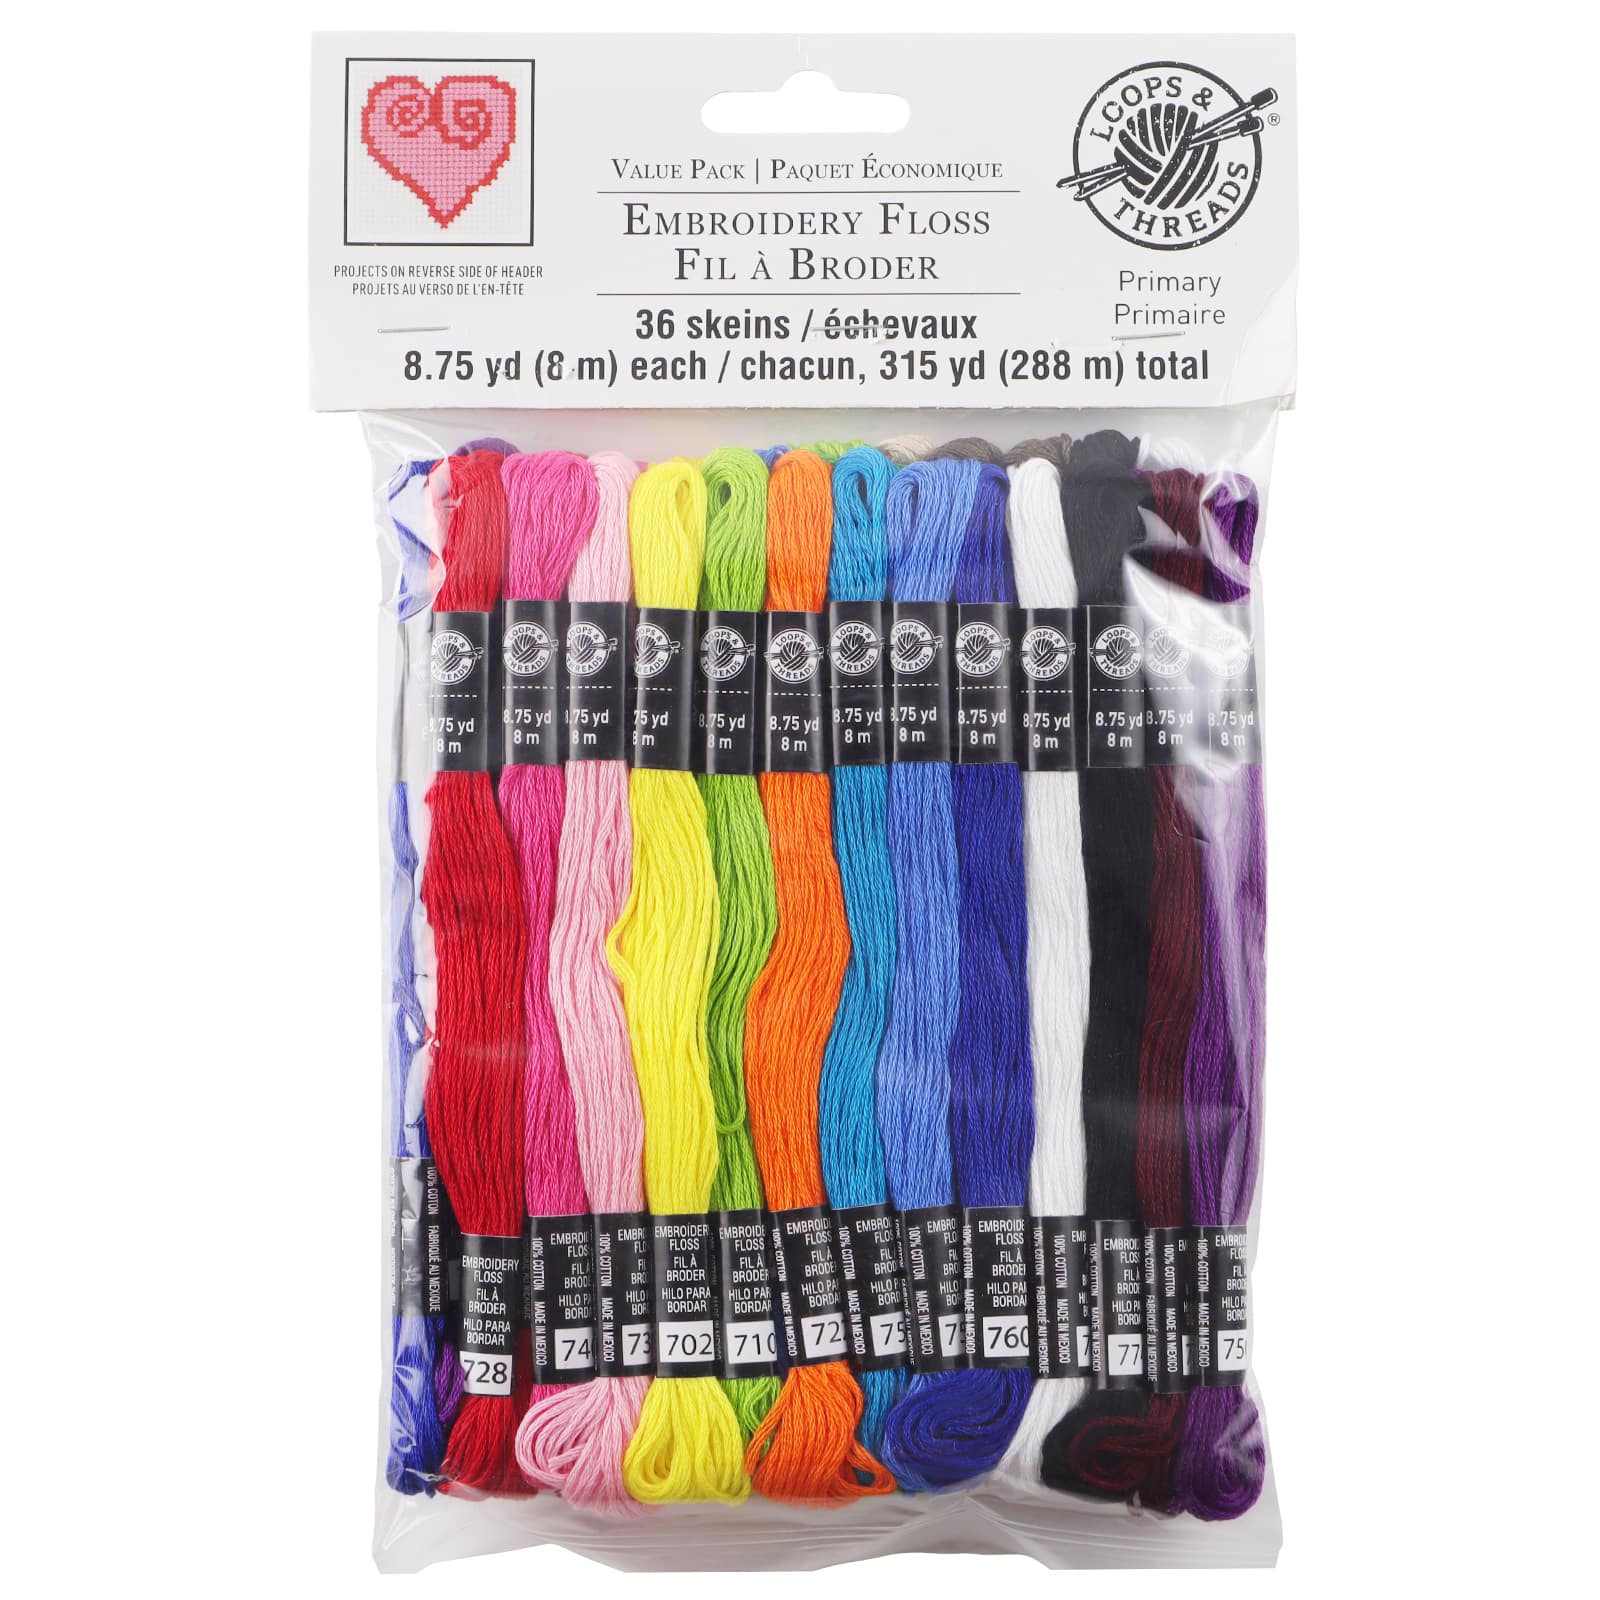 LOVIMAG Embroidery Floss 60 Skeins Per Pack for Cross Stitch  Threads,Embroidery Thread for Friendship Bracelet Making,Embroidery String  for Craft